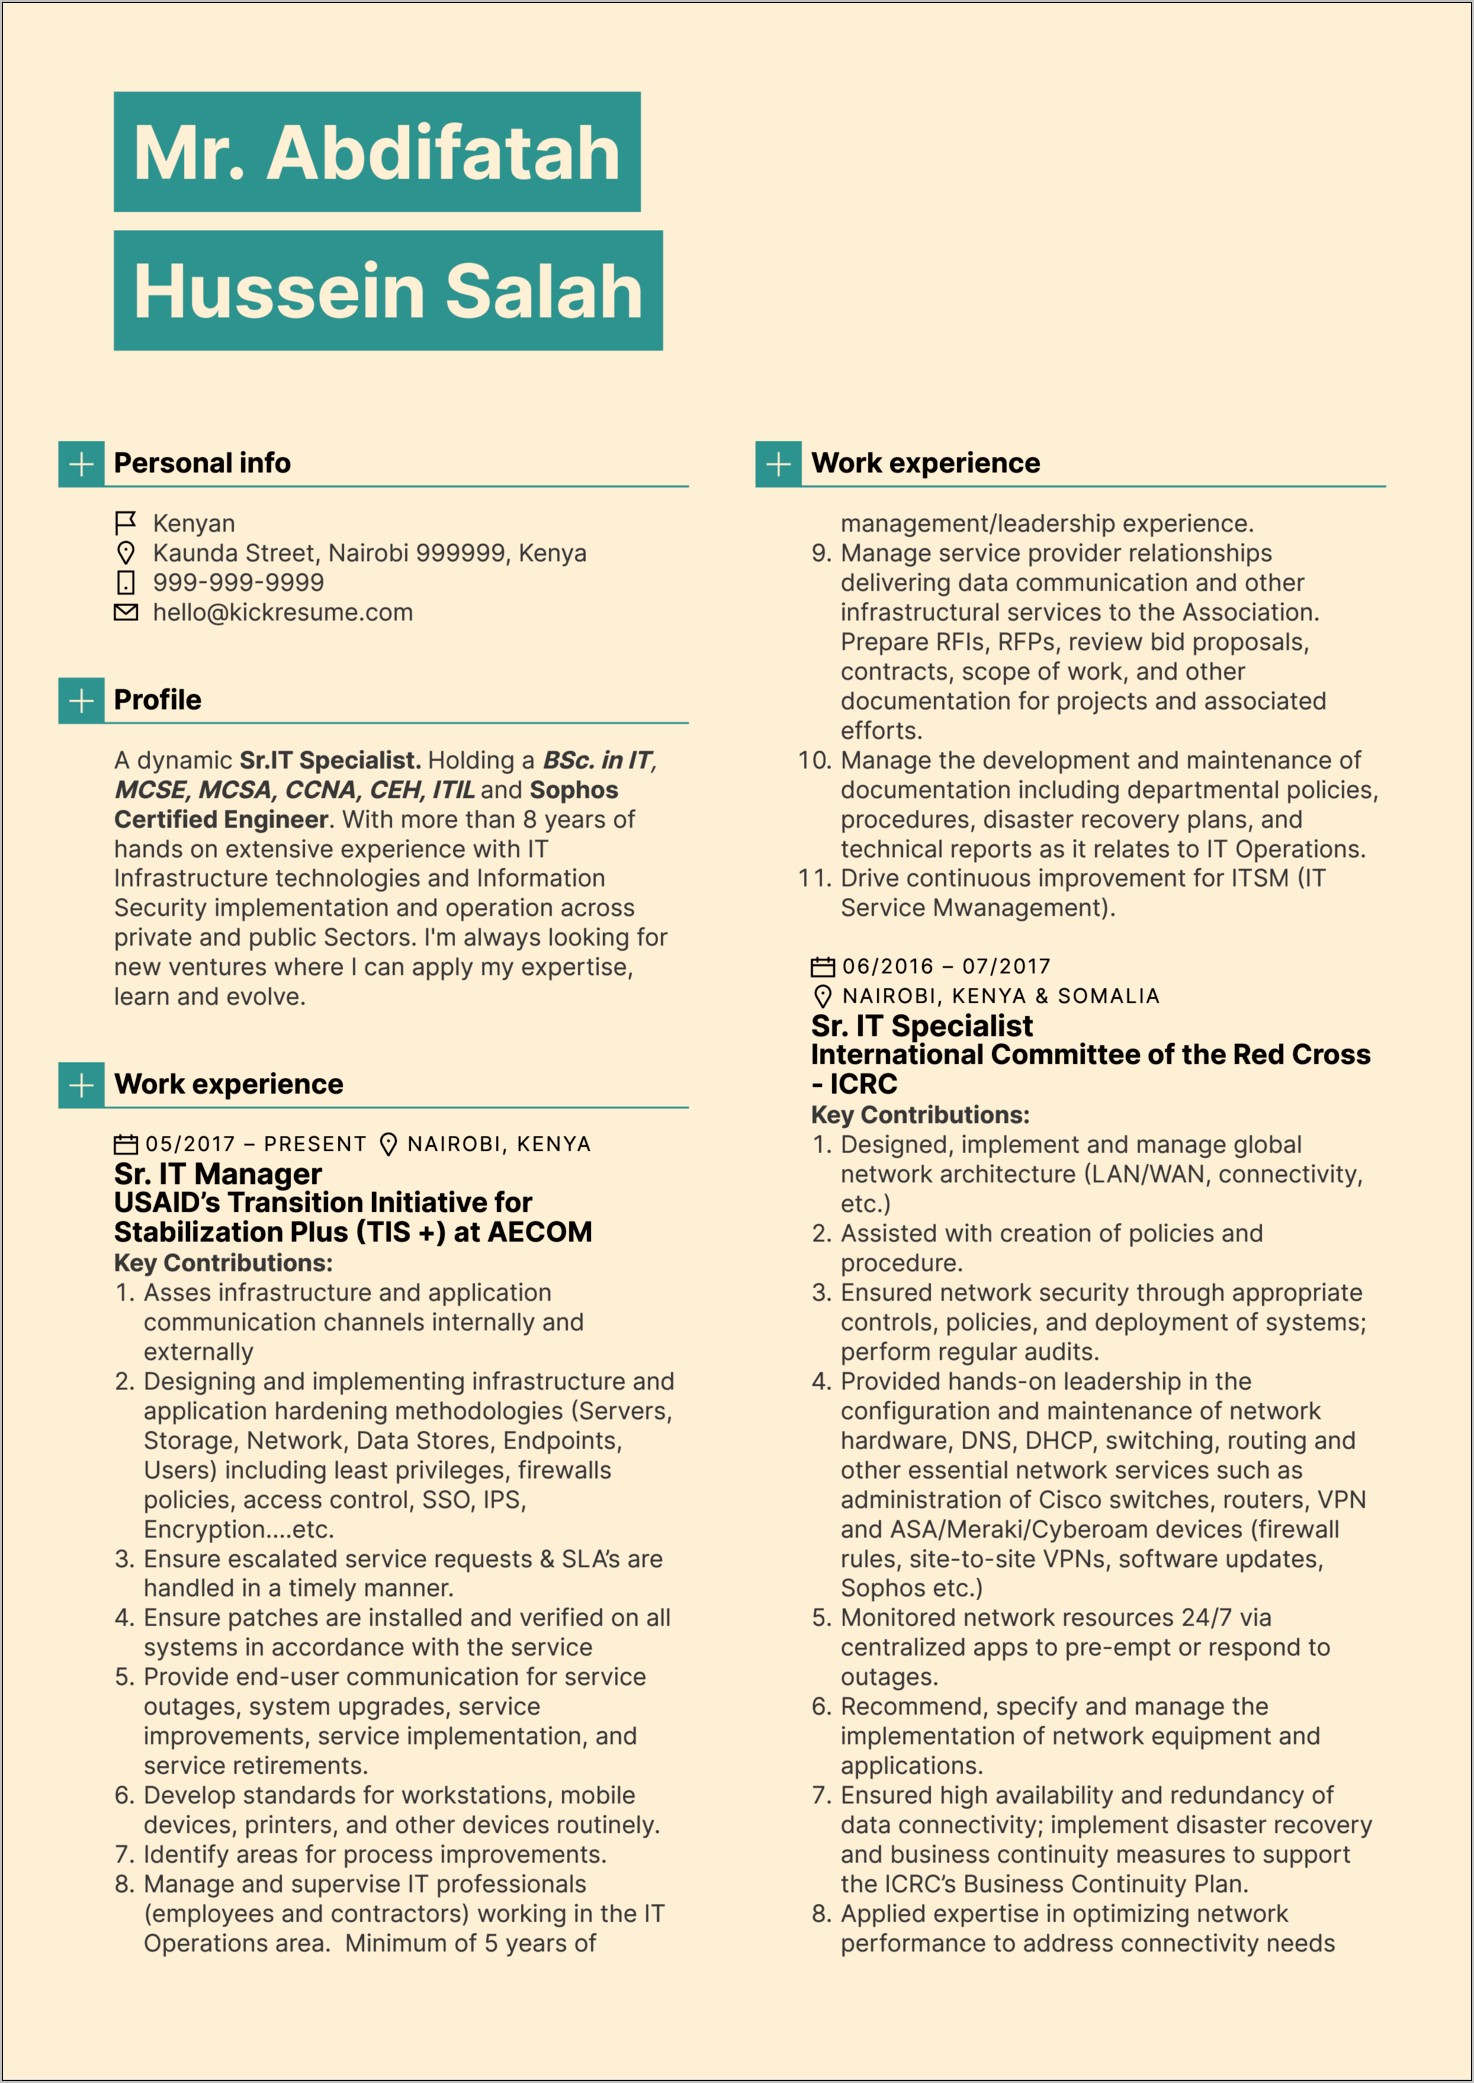 Loan Or Grant Officer Resume Examples